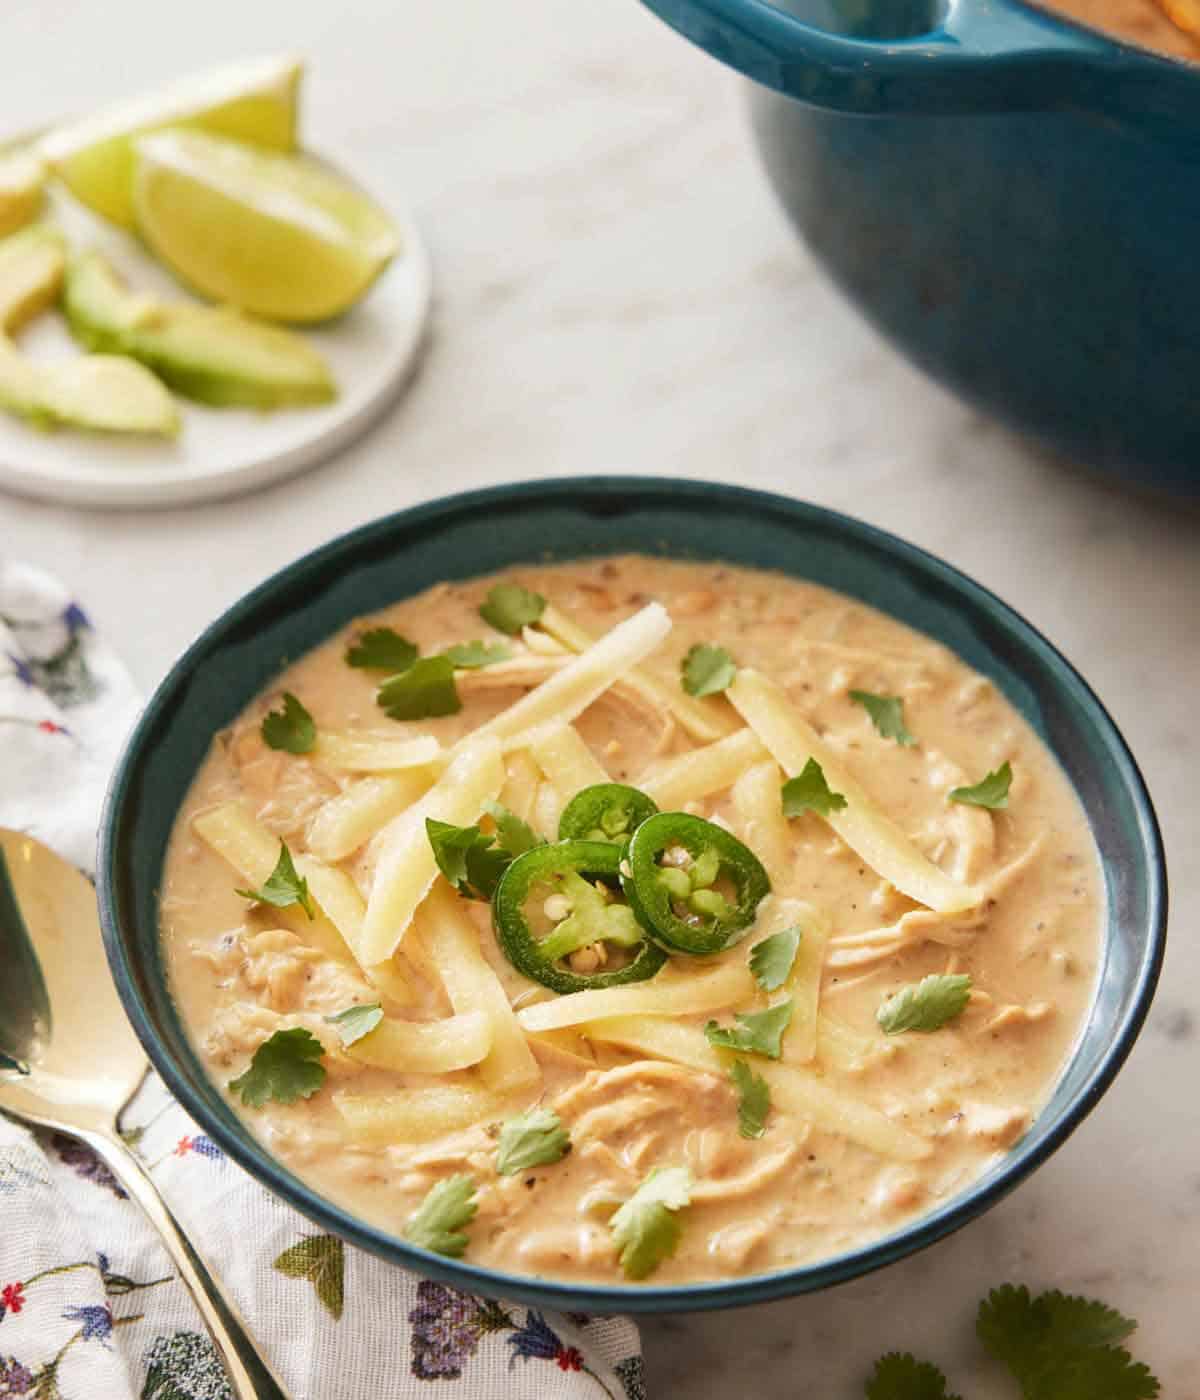 A bowl of white chicken chili with some sliced jalapeno, cilantro, and shredded cheese on top.